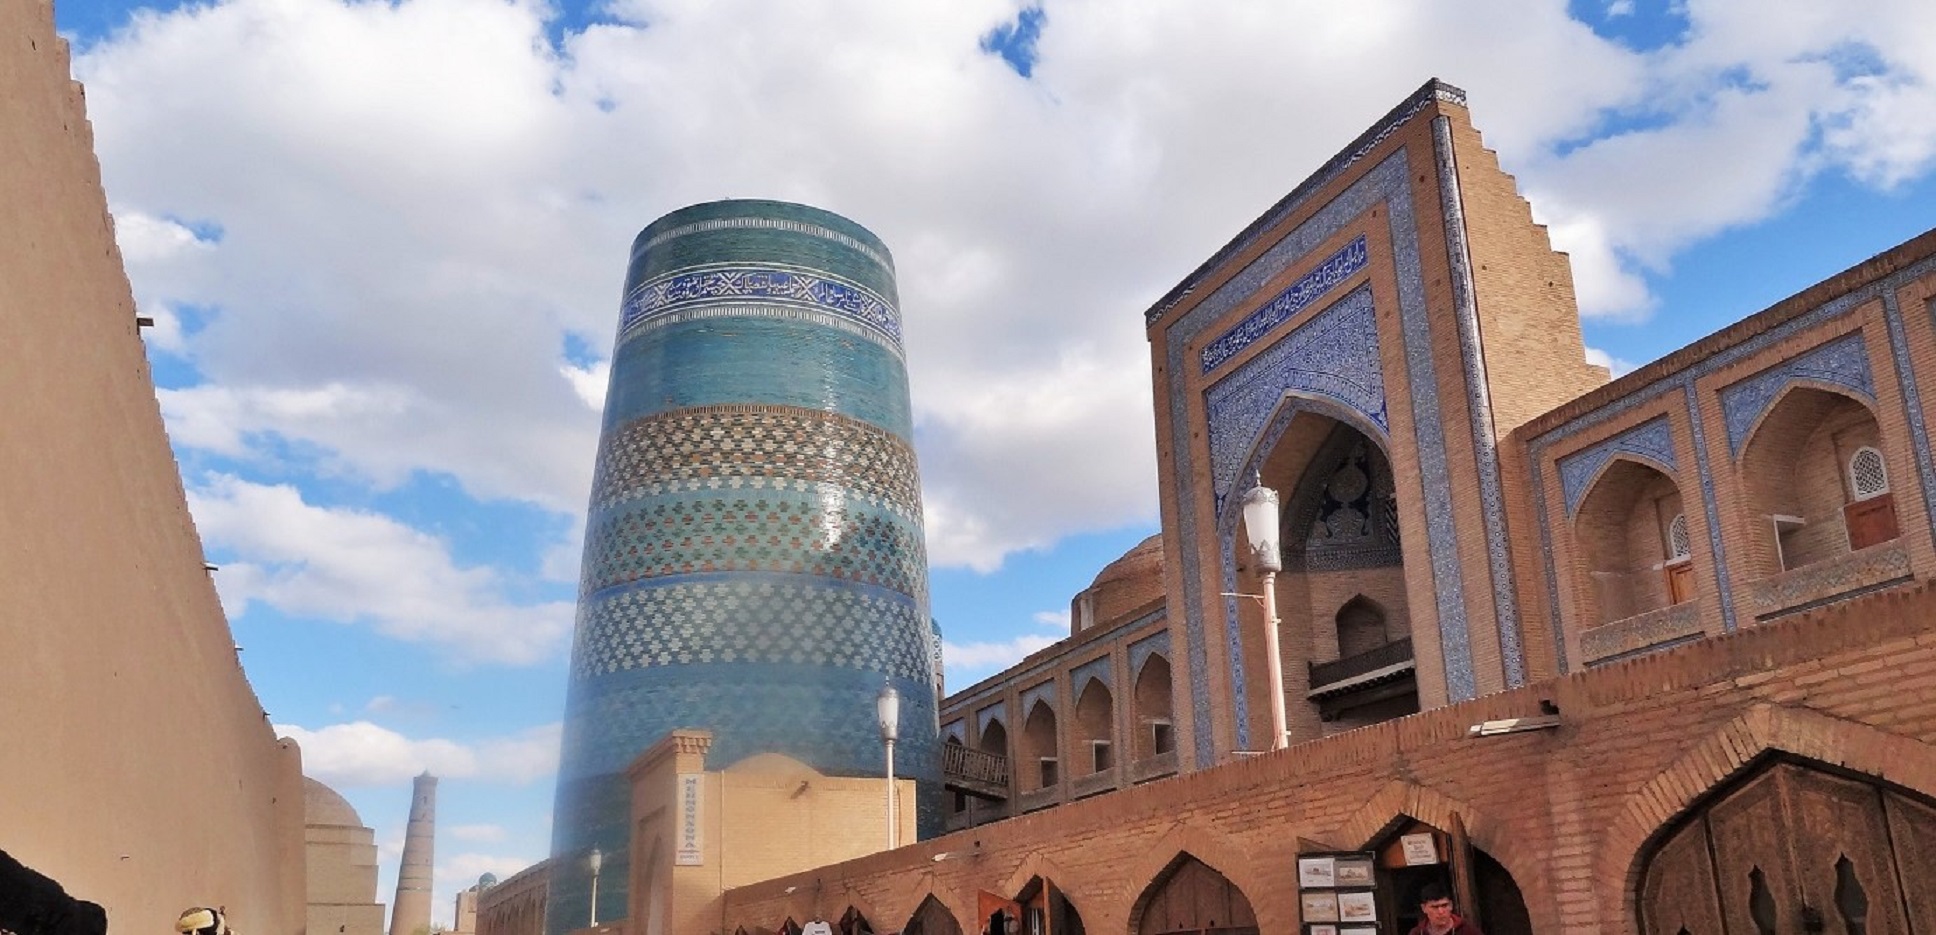 Itchan Kala - Historic Heart of Khiva on Ancient Silk Route